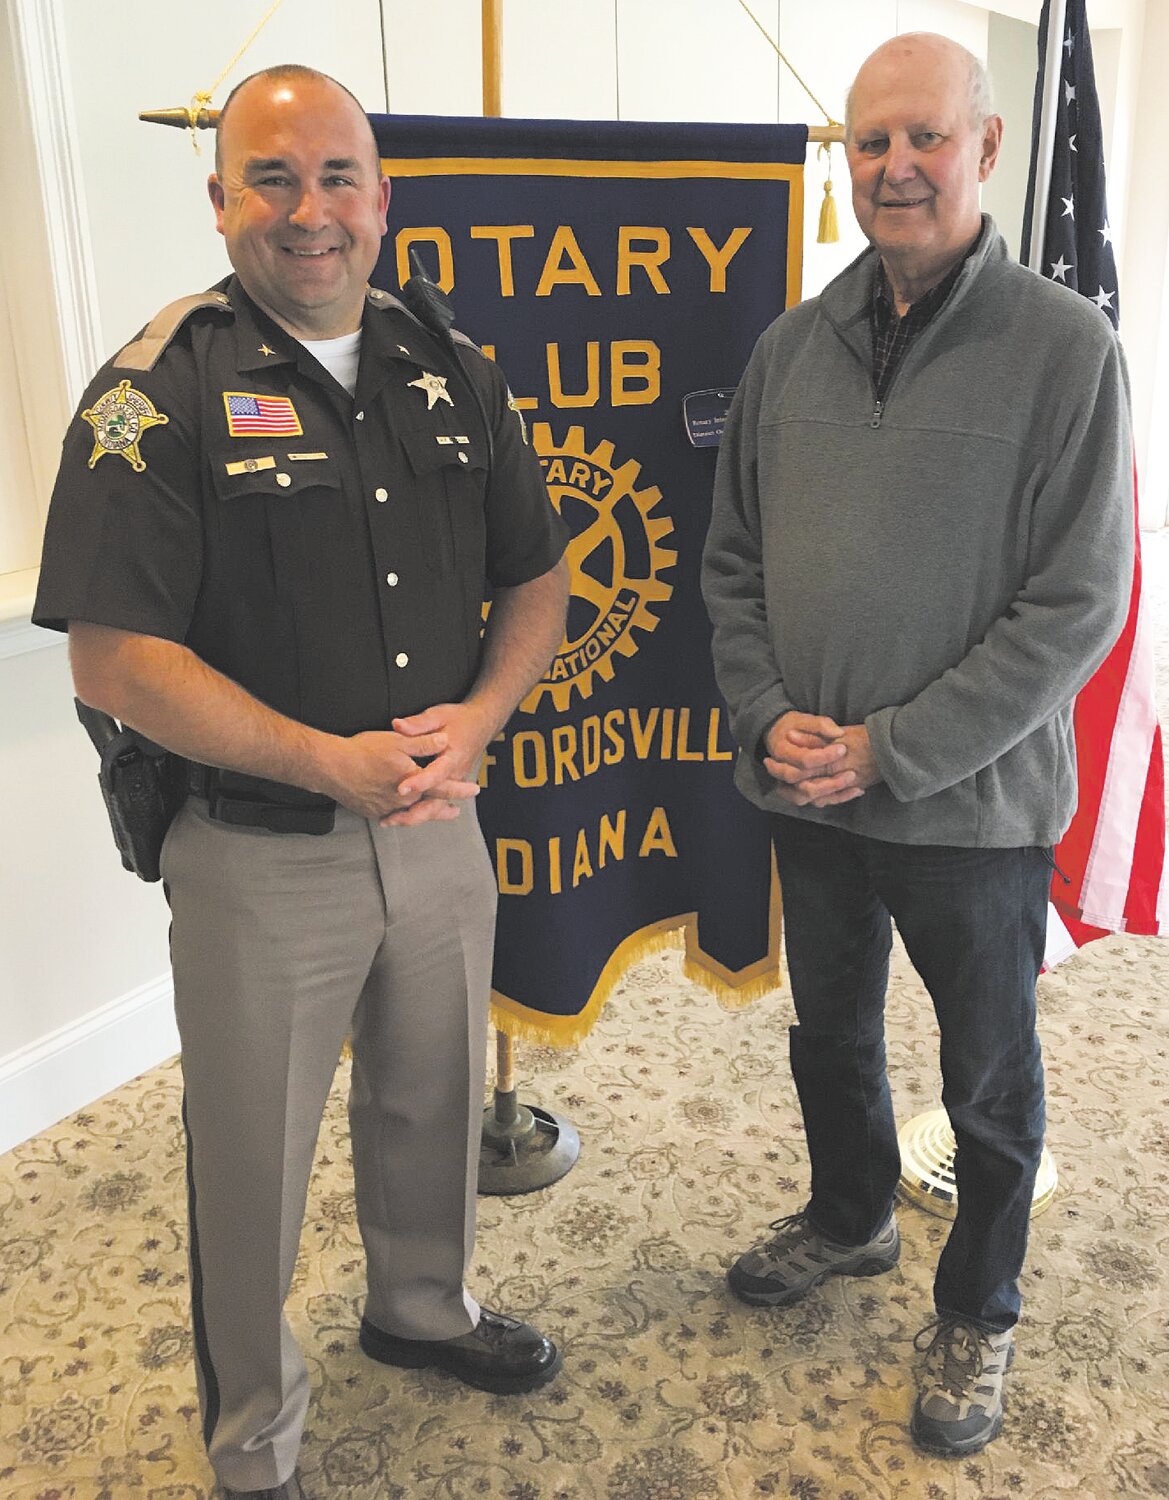 Montgomery County Sheriff Ryan Needham spoke to the Crawfordsville Rotary Club at their noon meeting. Needham has been involved in law enforcement for 28 years and is serving his second term as sheriff. The MCSO places a greater emphasis on traffic enforcement. Sometimes much information can be gotten from a traffic stop. Needham presented some interesting facts. From Jan. 1 to April 22 the MCSO received 7,200 calls. Of those calls, 2,073 were pertaining to traffic situations. One hundred and sixty-four citations were given for various offenses. At the present time there are 173 inmates at the jail.  There are three shifts which includes a day shift, a mid-shift and a night shift. All deputies wear body cameras. Needham reminded us that it takes all of us to work together to help keep Montgomery County safe.